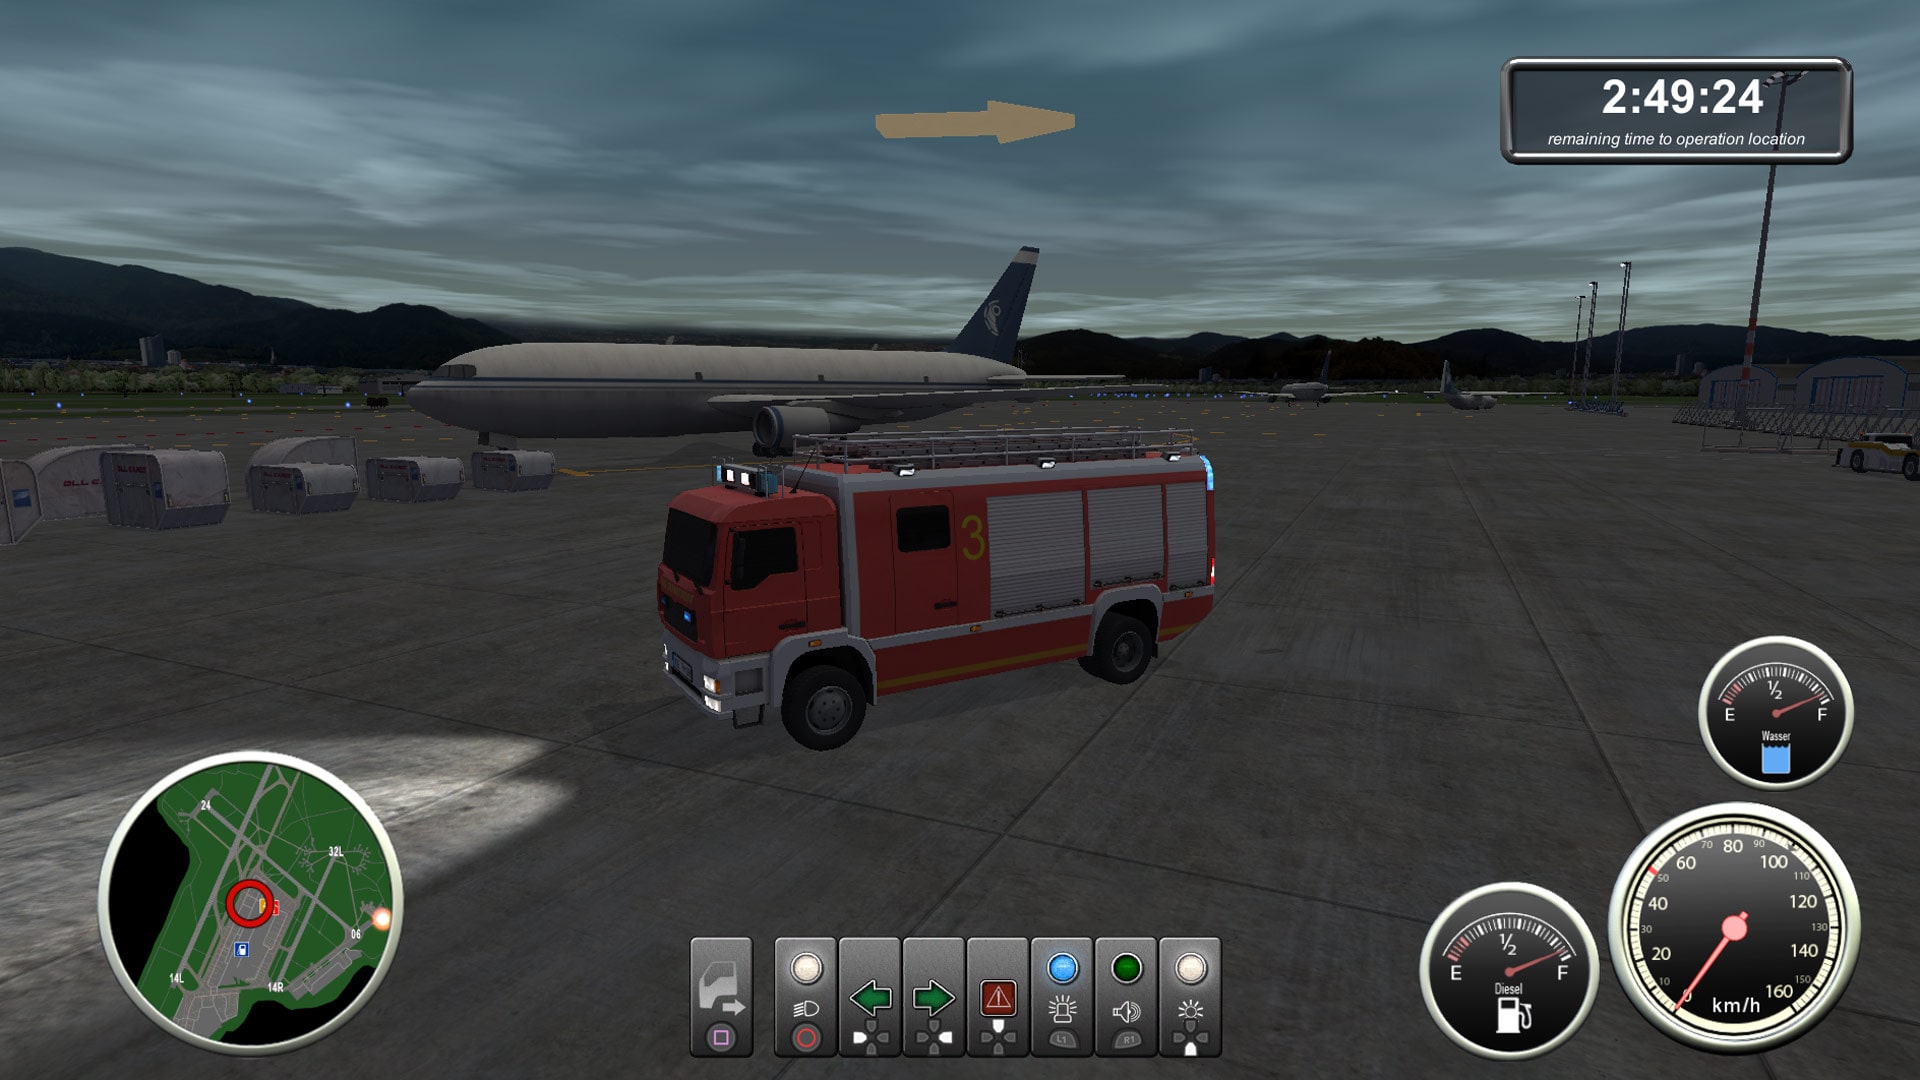 Firefighters Airport Fire Department